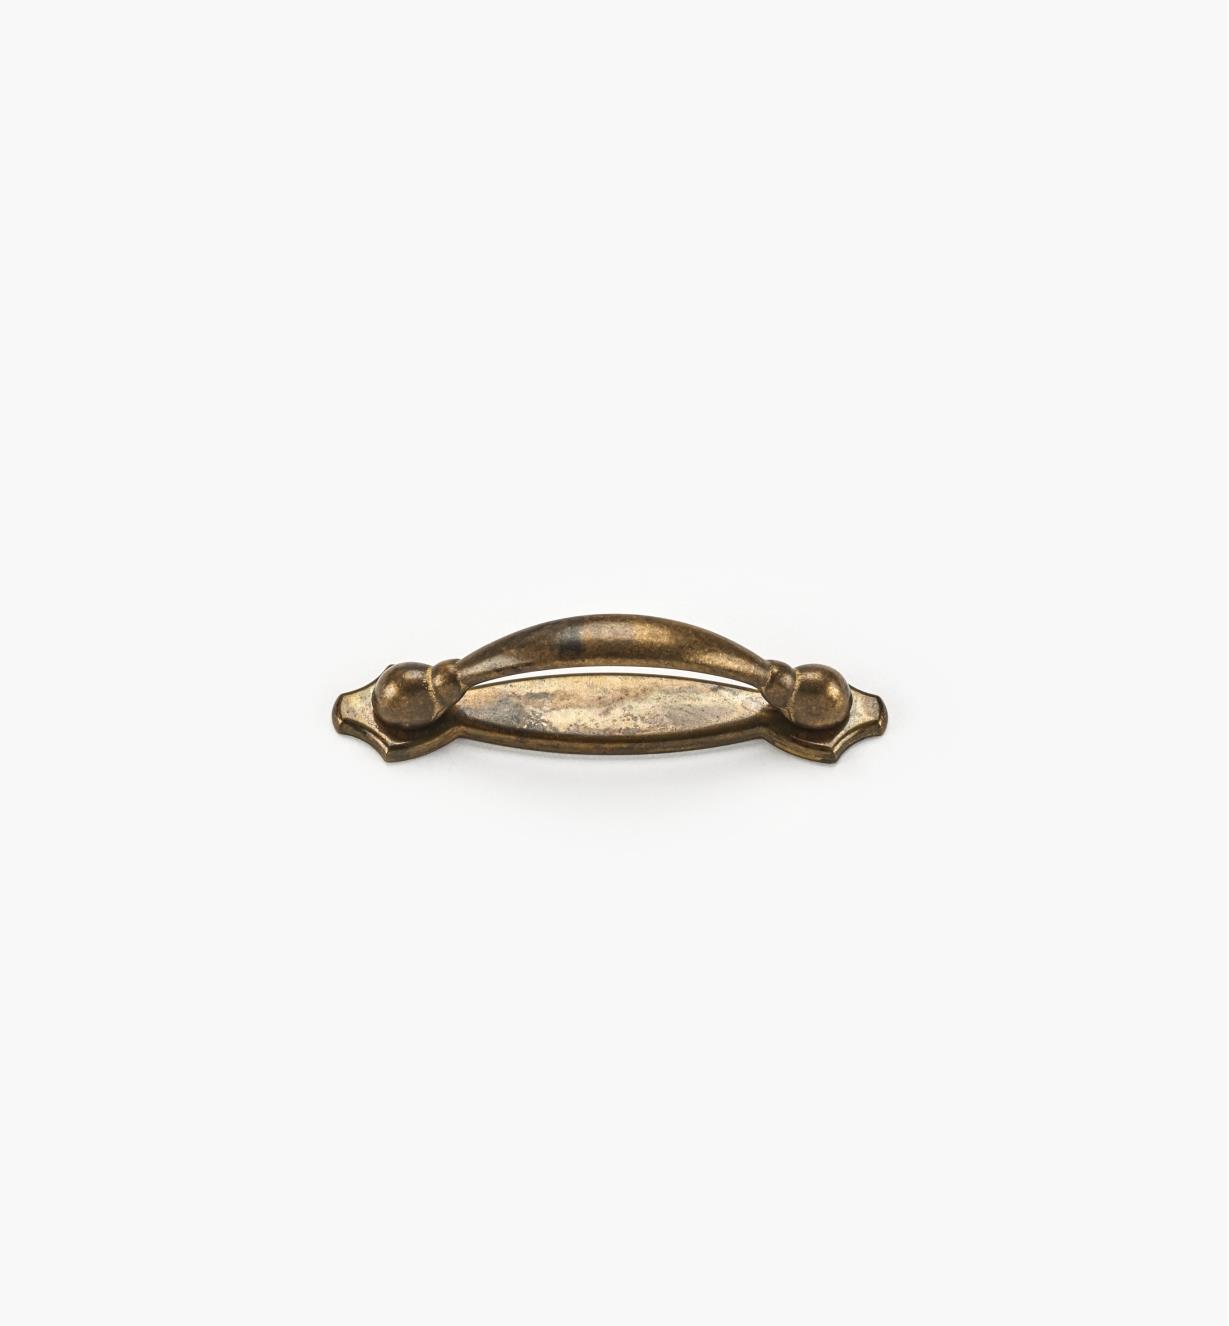 00A2931 - 64mm Old Brass Plated Handle